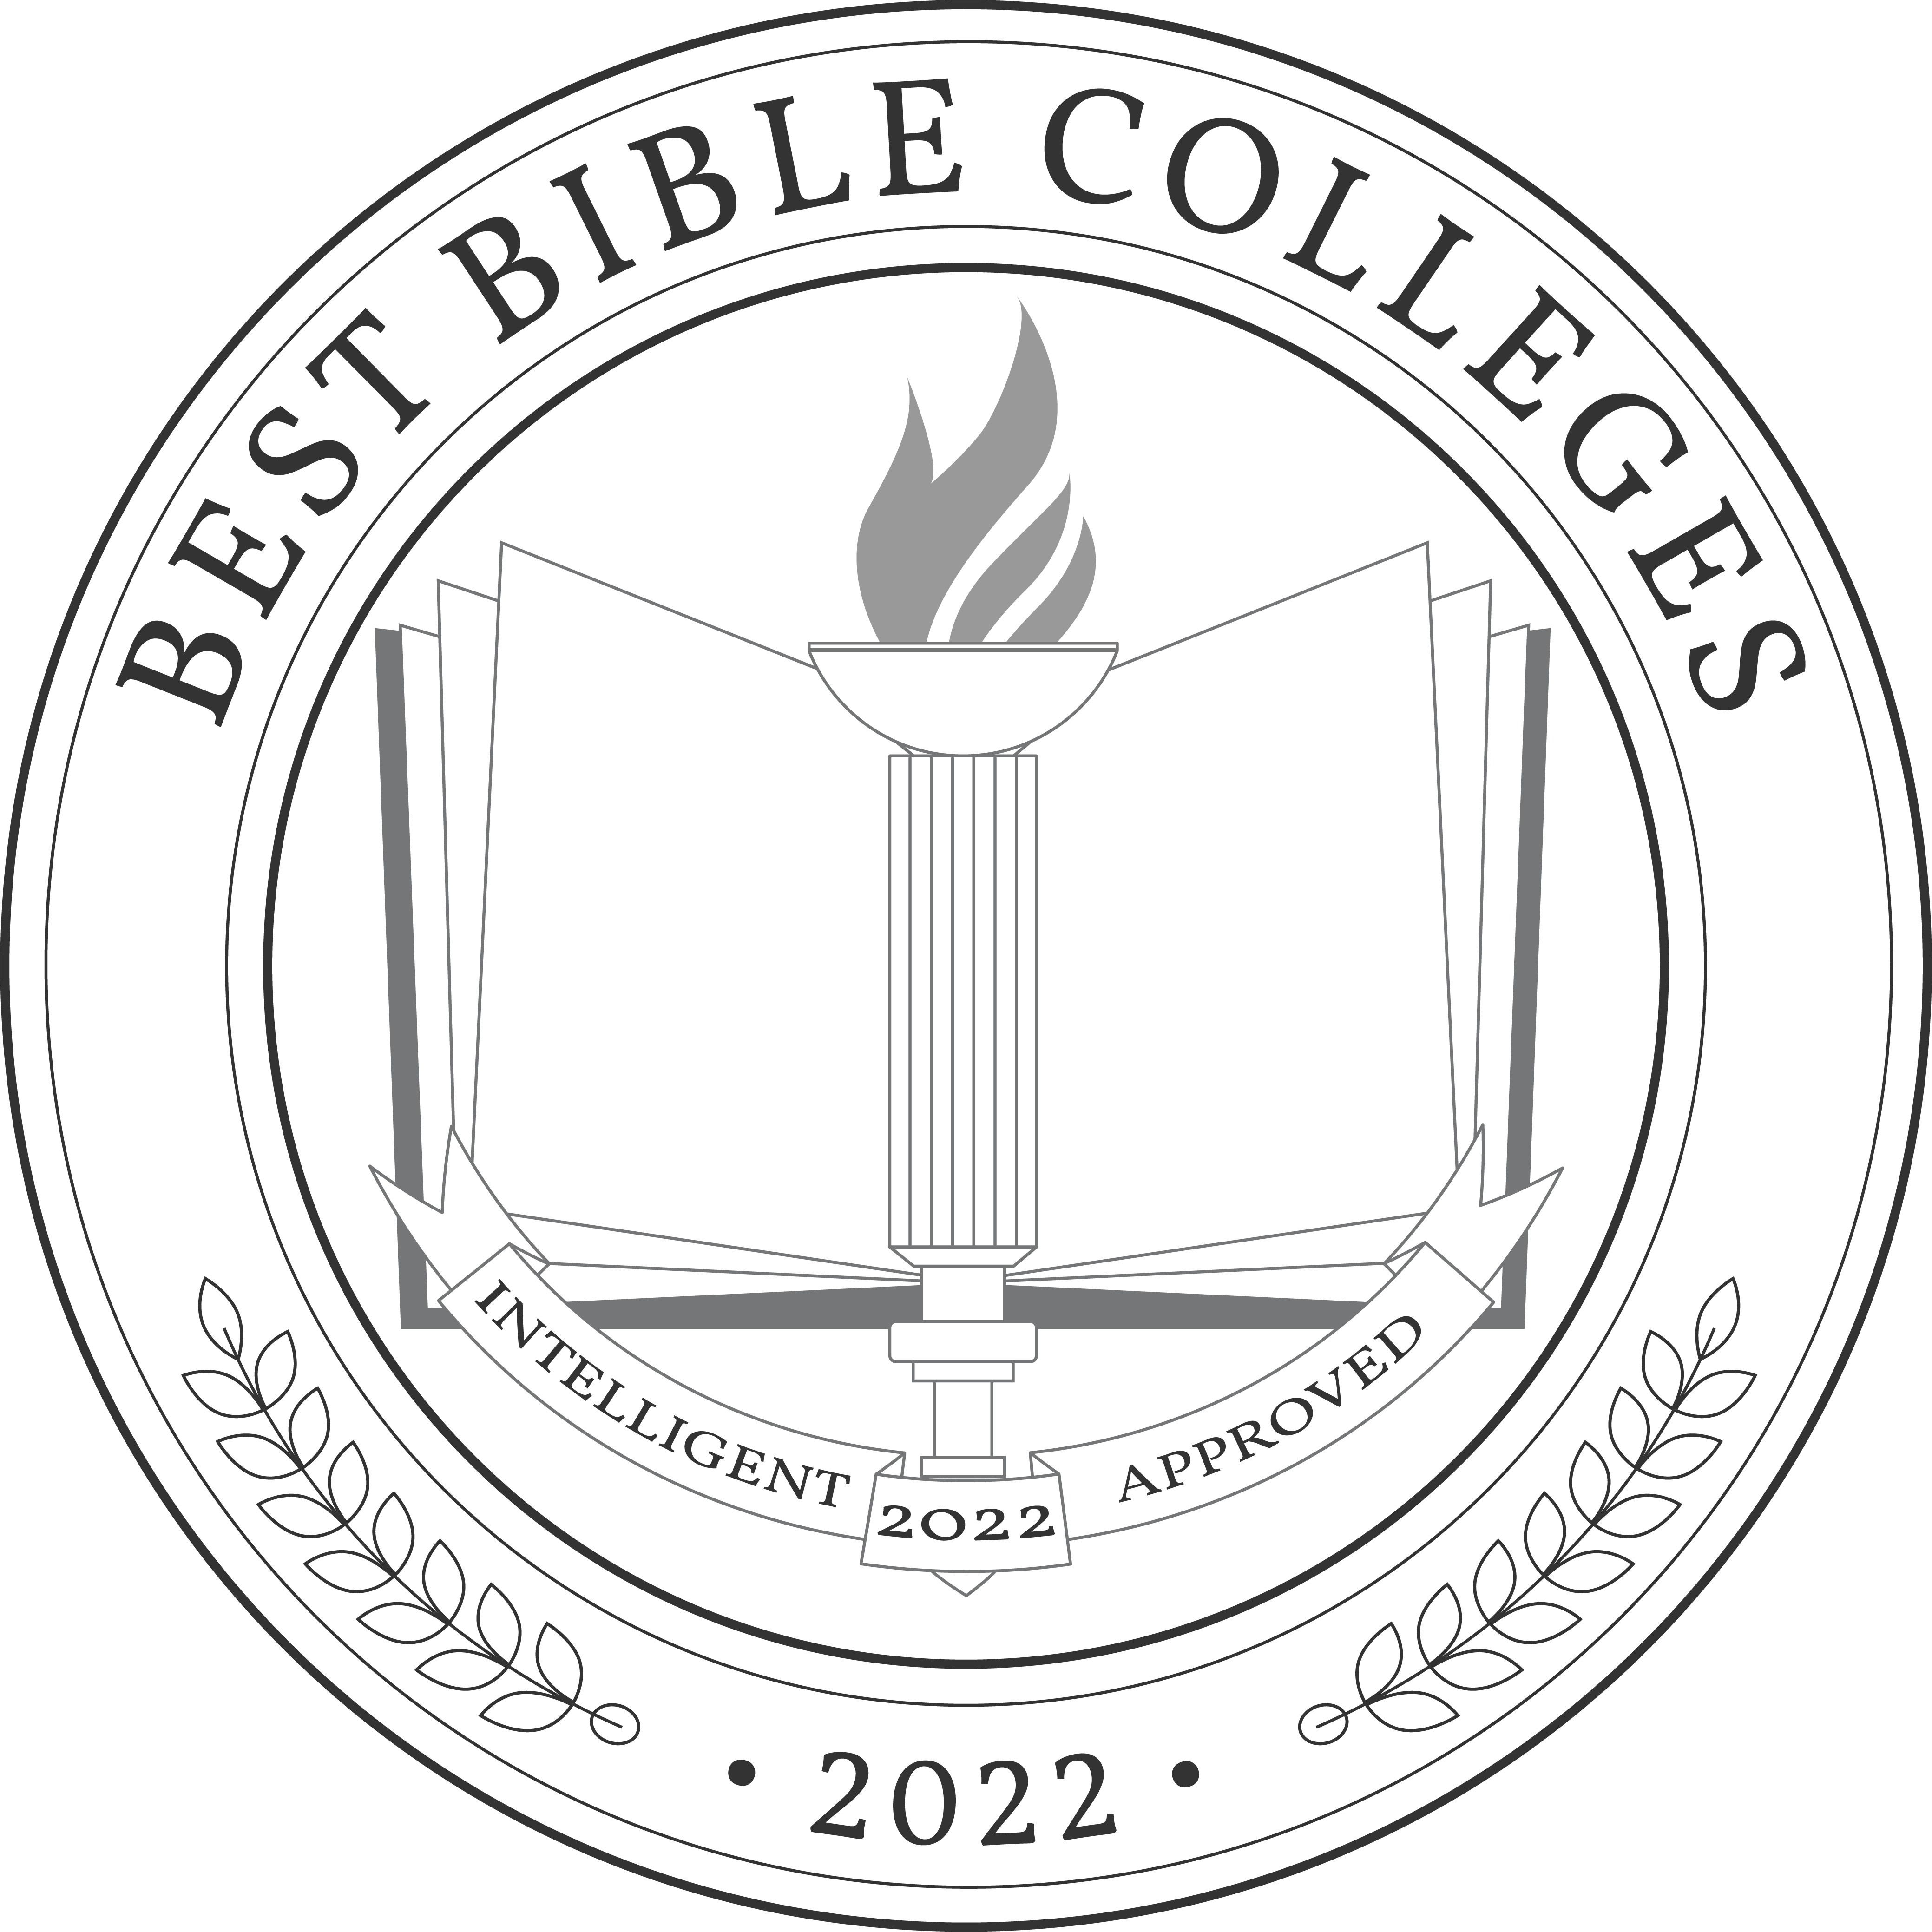 Best-Bible-Colleges-2022-Badge.png